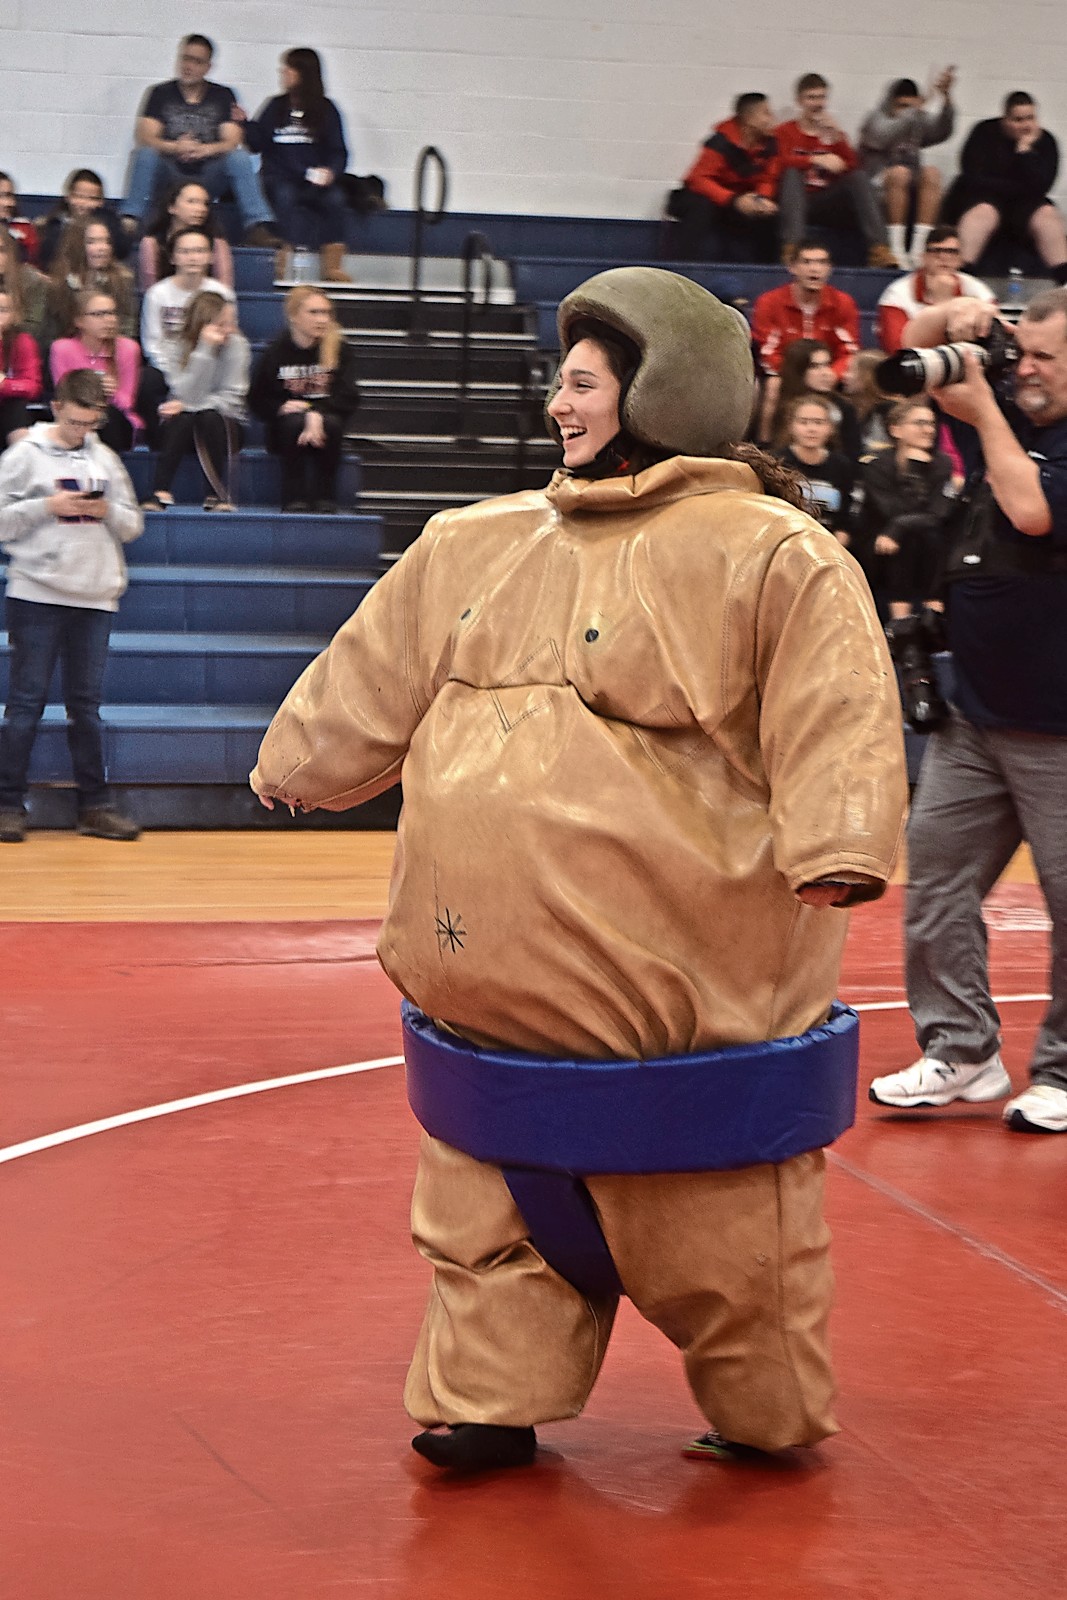 Victoria DiMartino, a MacArthur senior and soccer player, prepared to wrestle against a teammate.